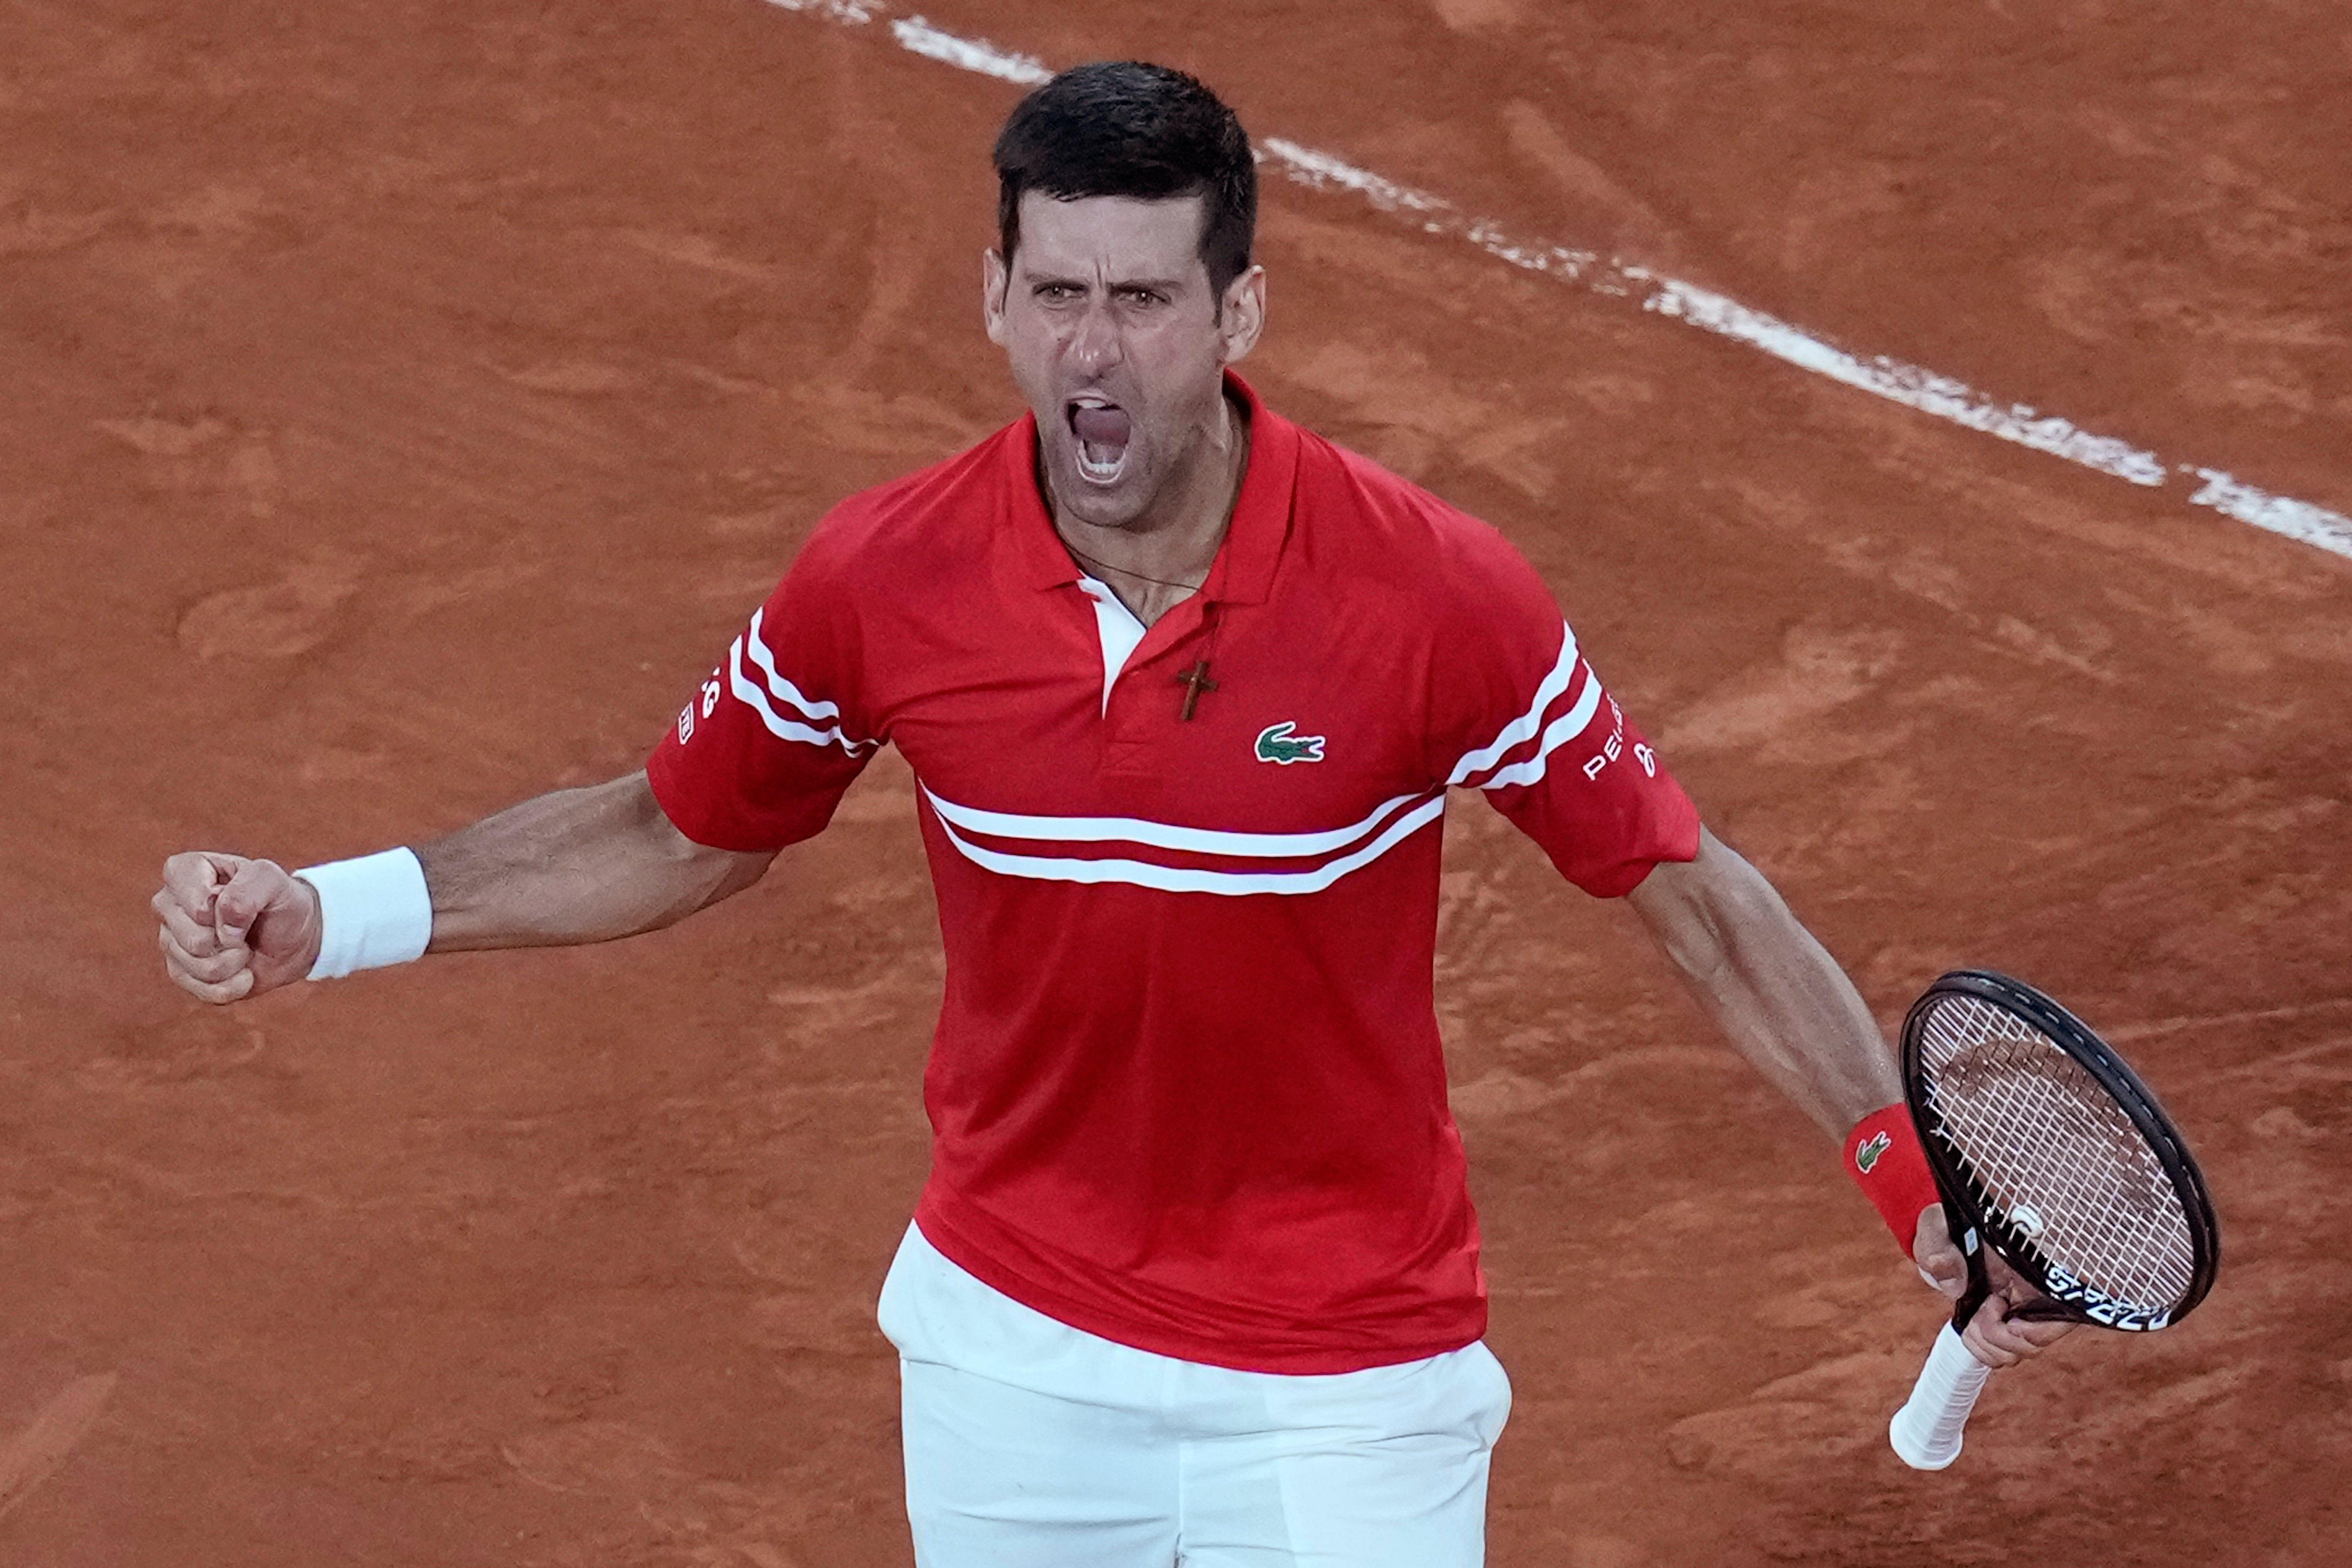 French Open 2021 Novak Djokovic overcomes Rafael Nadal in classic to reach final The Independent